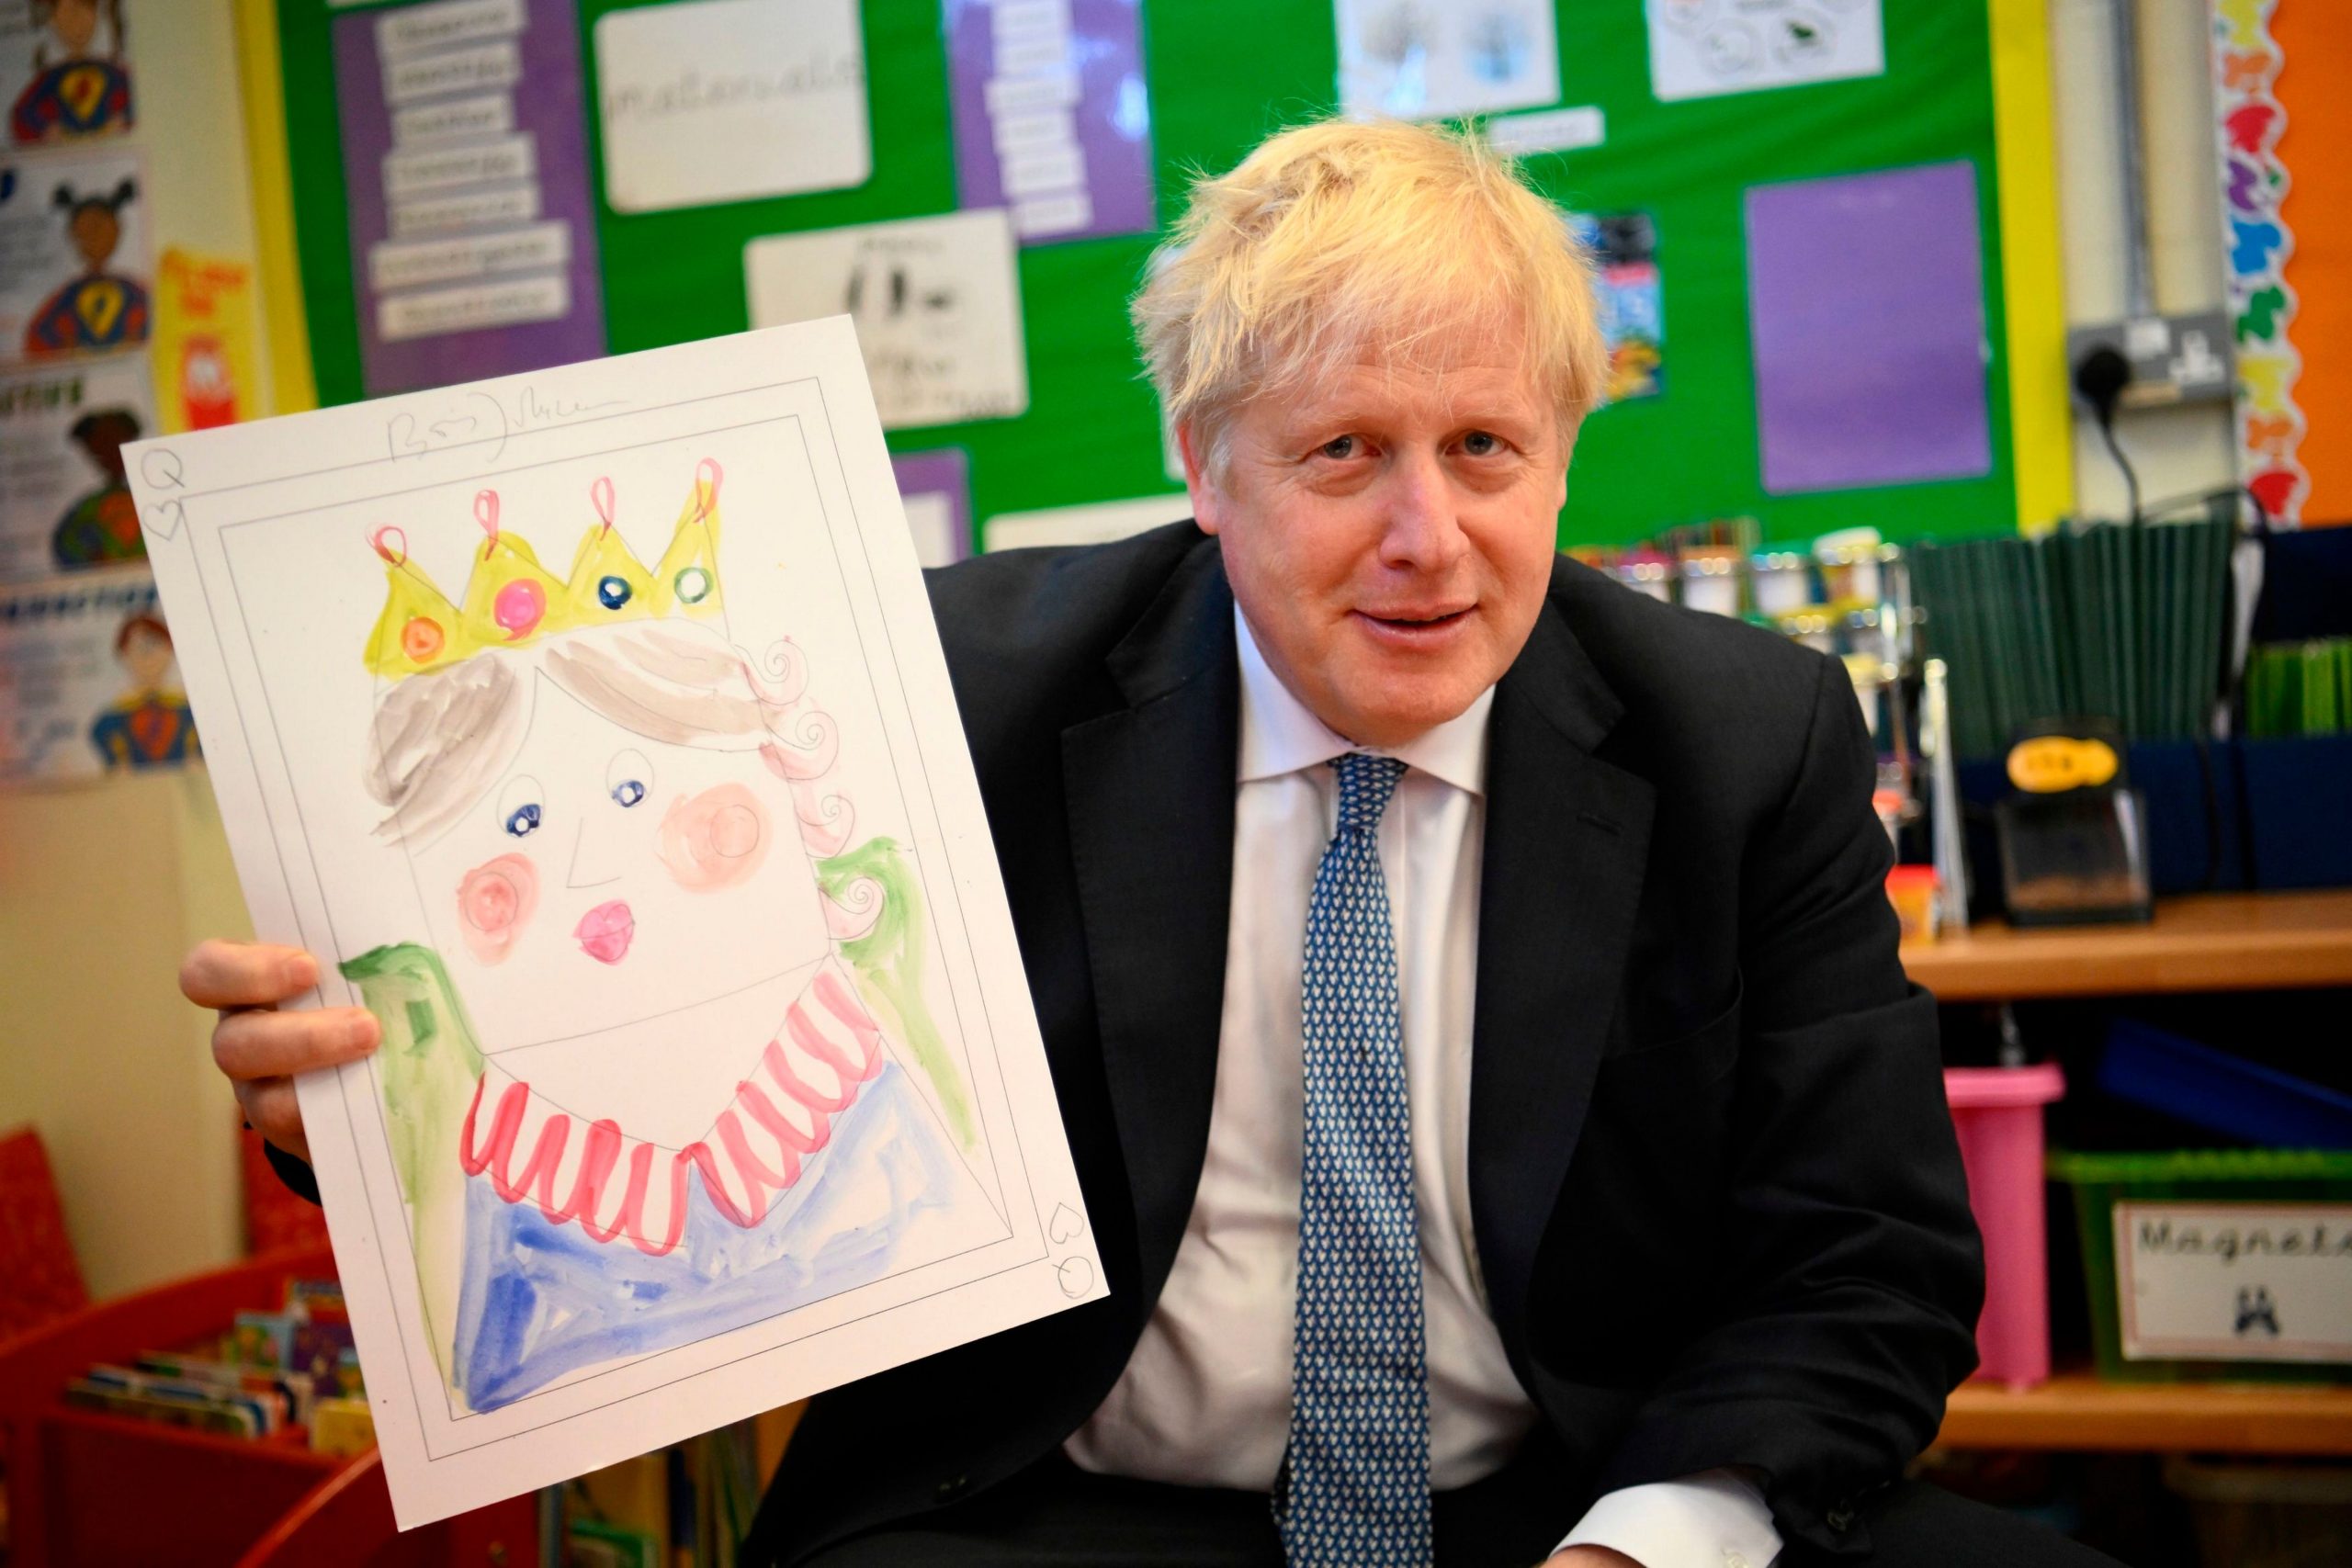 No ‘psychological transformation’ for Boris Johnson: How he aims to stay put till 2030